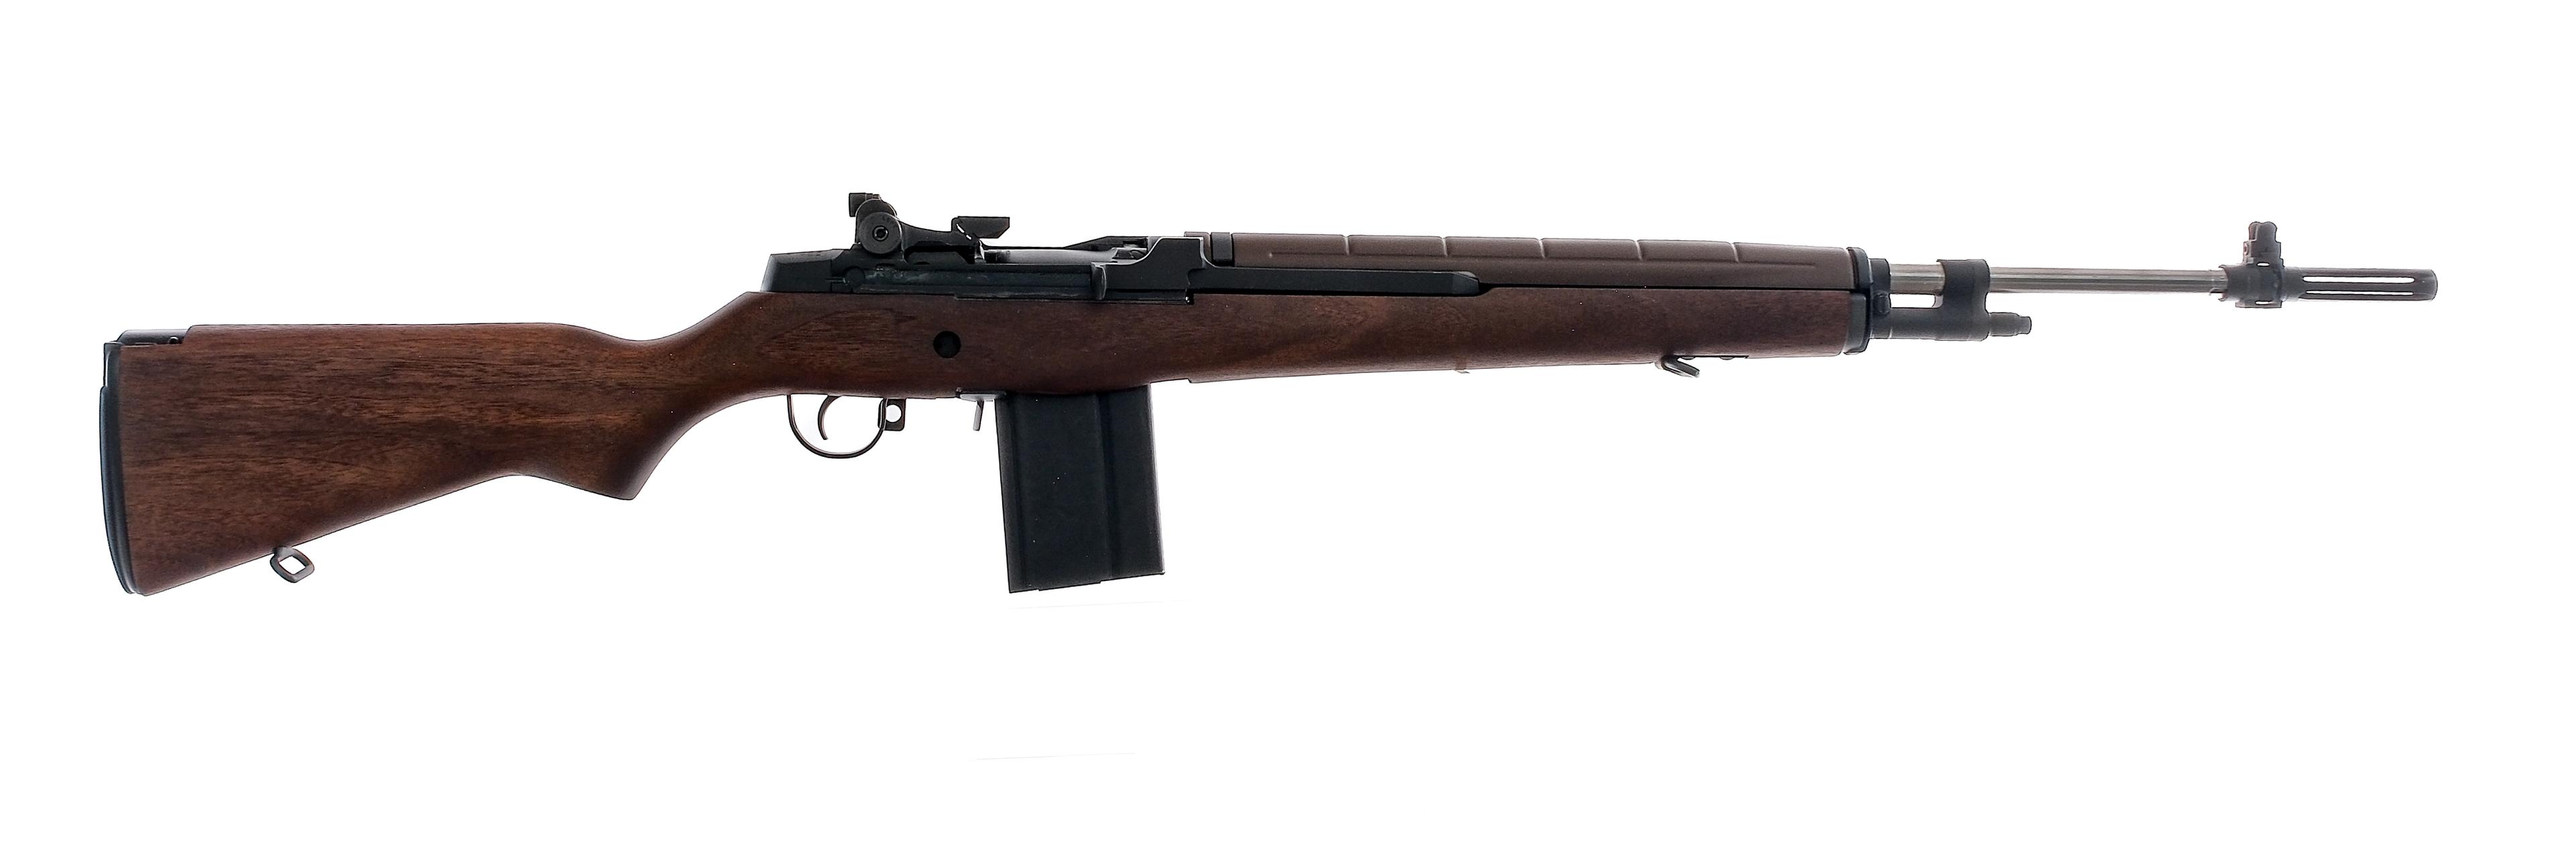 Springfield Armory M1A National Match .308